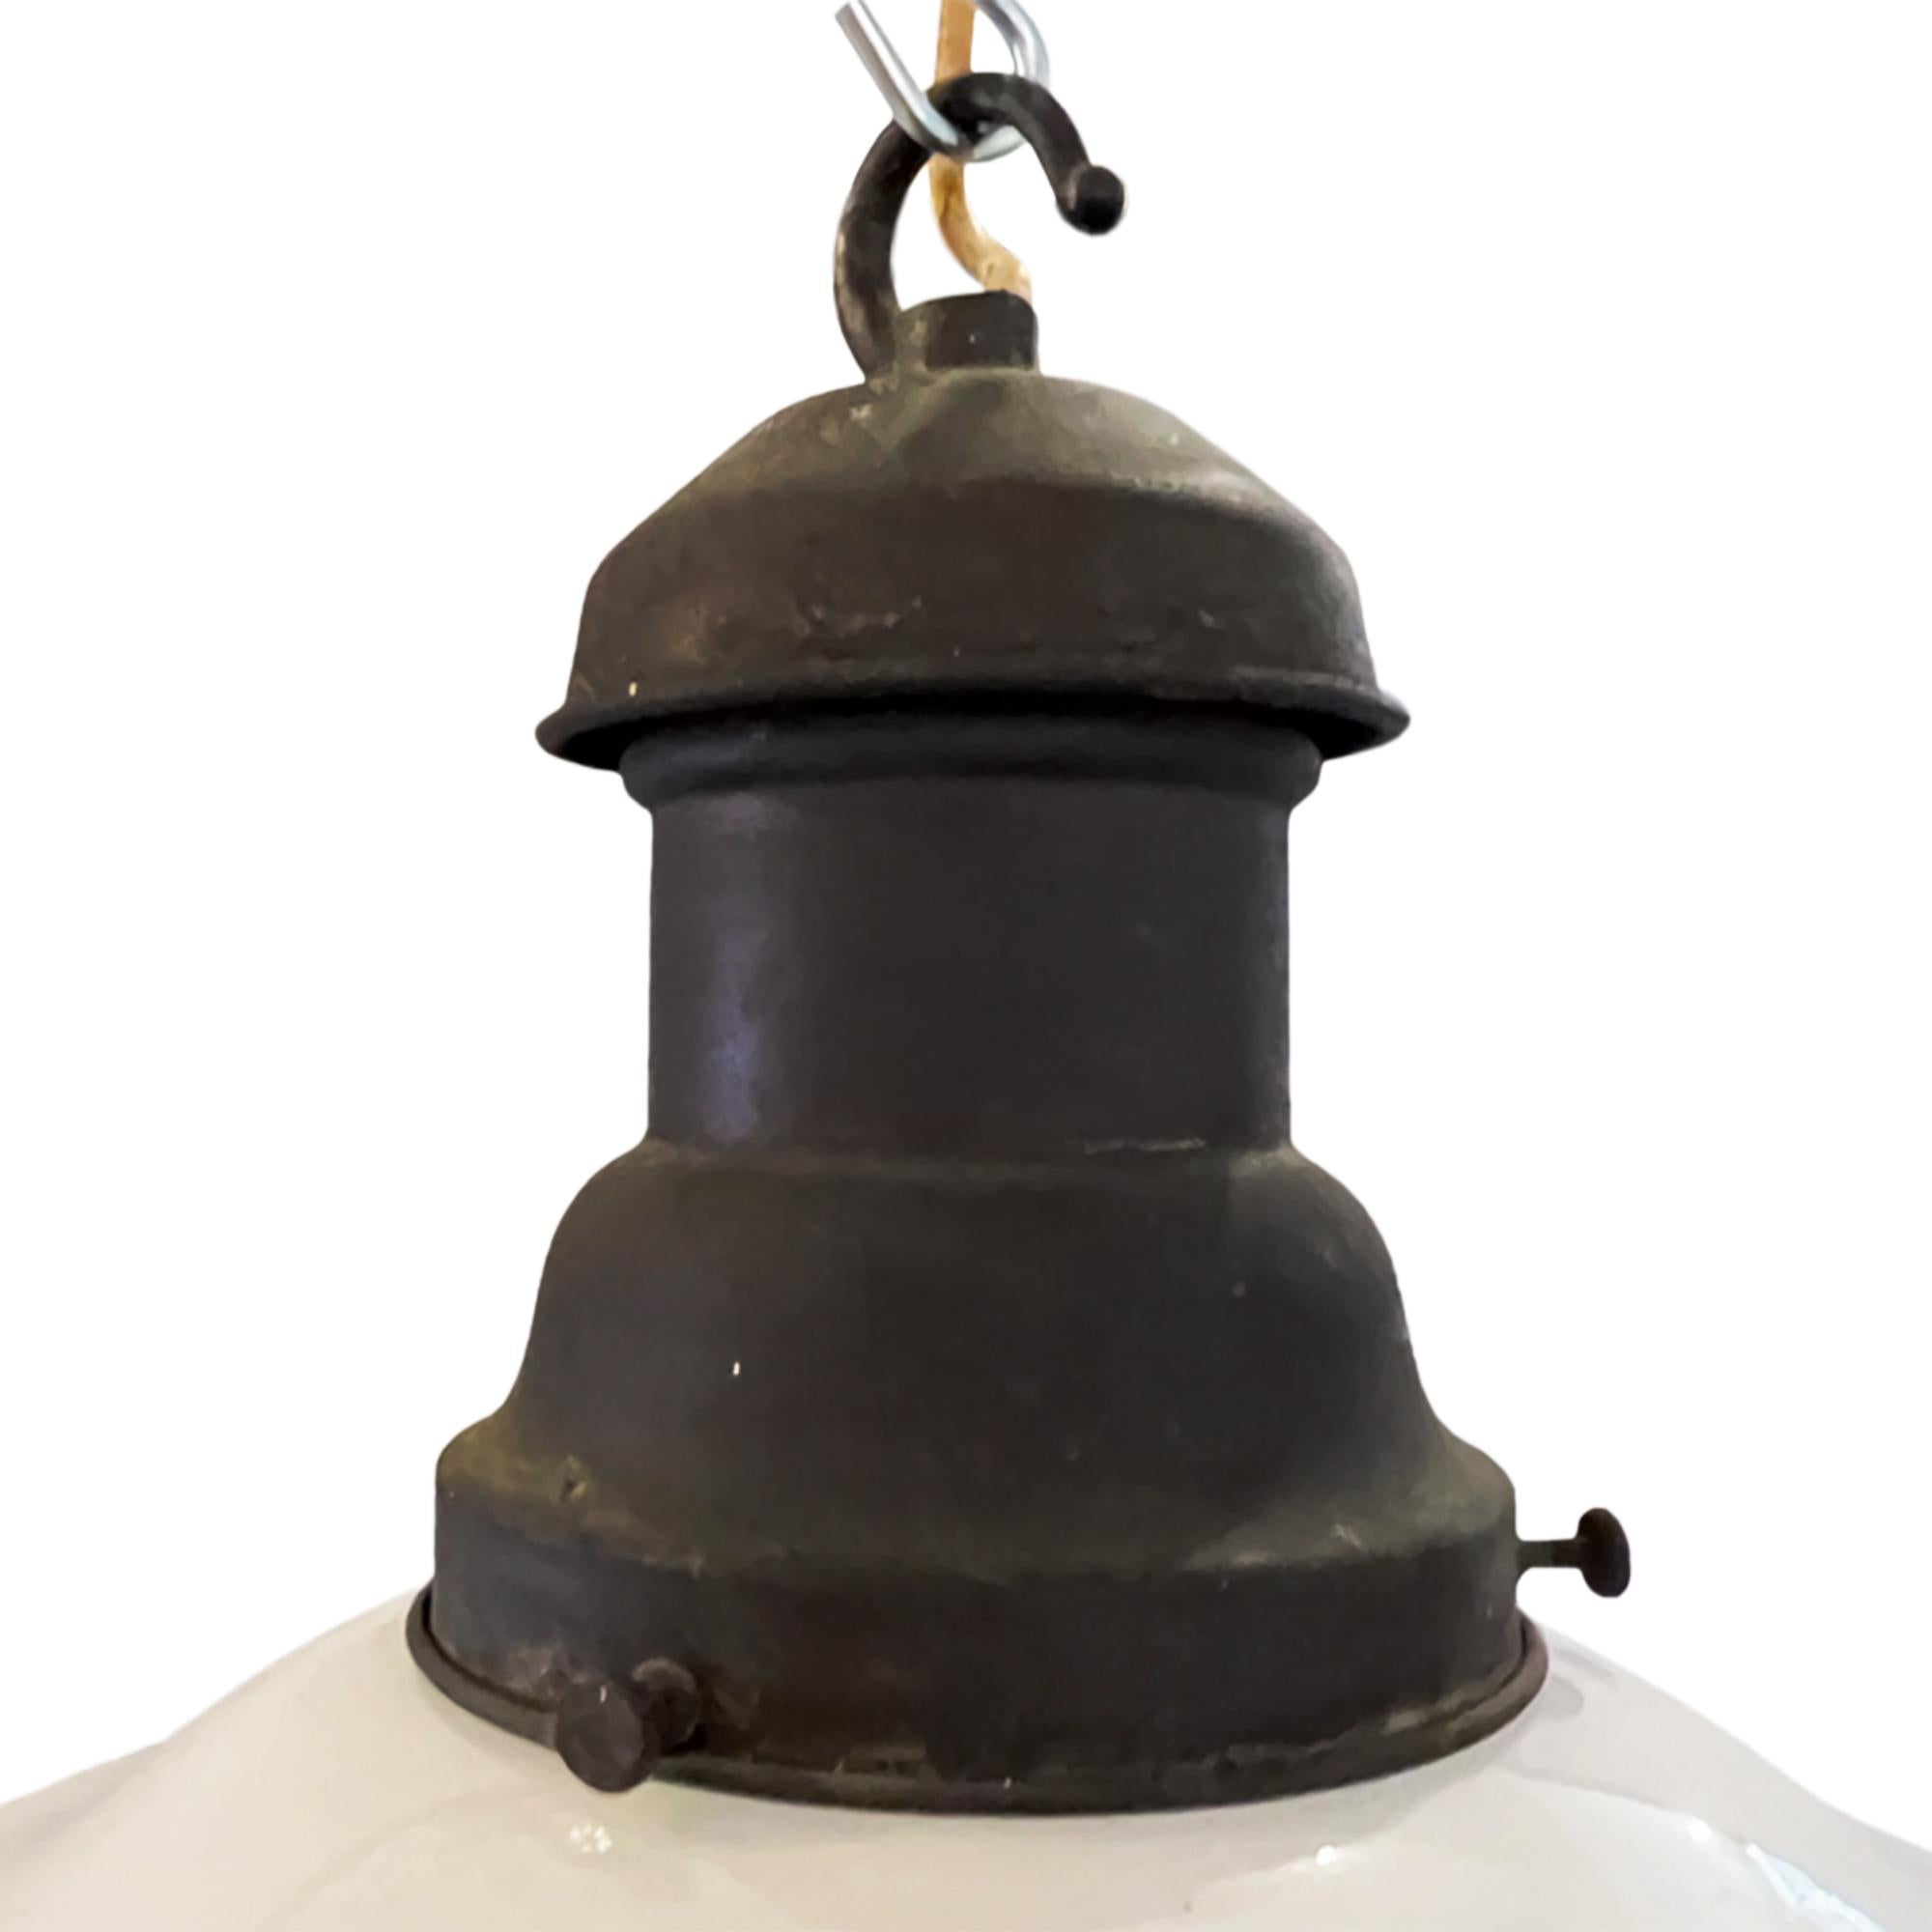 We have several of these classic English pendant lights please take a look at our storefront or get in touch for more information. We have a set of 3 in a similar style, but slightly smaller. They can be sold as a set, or individually if you prefer.